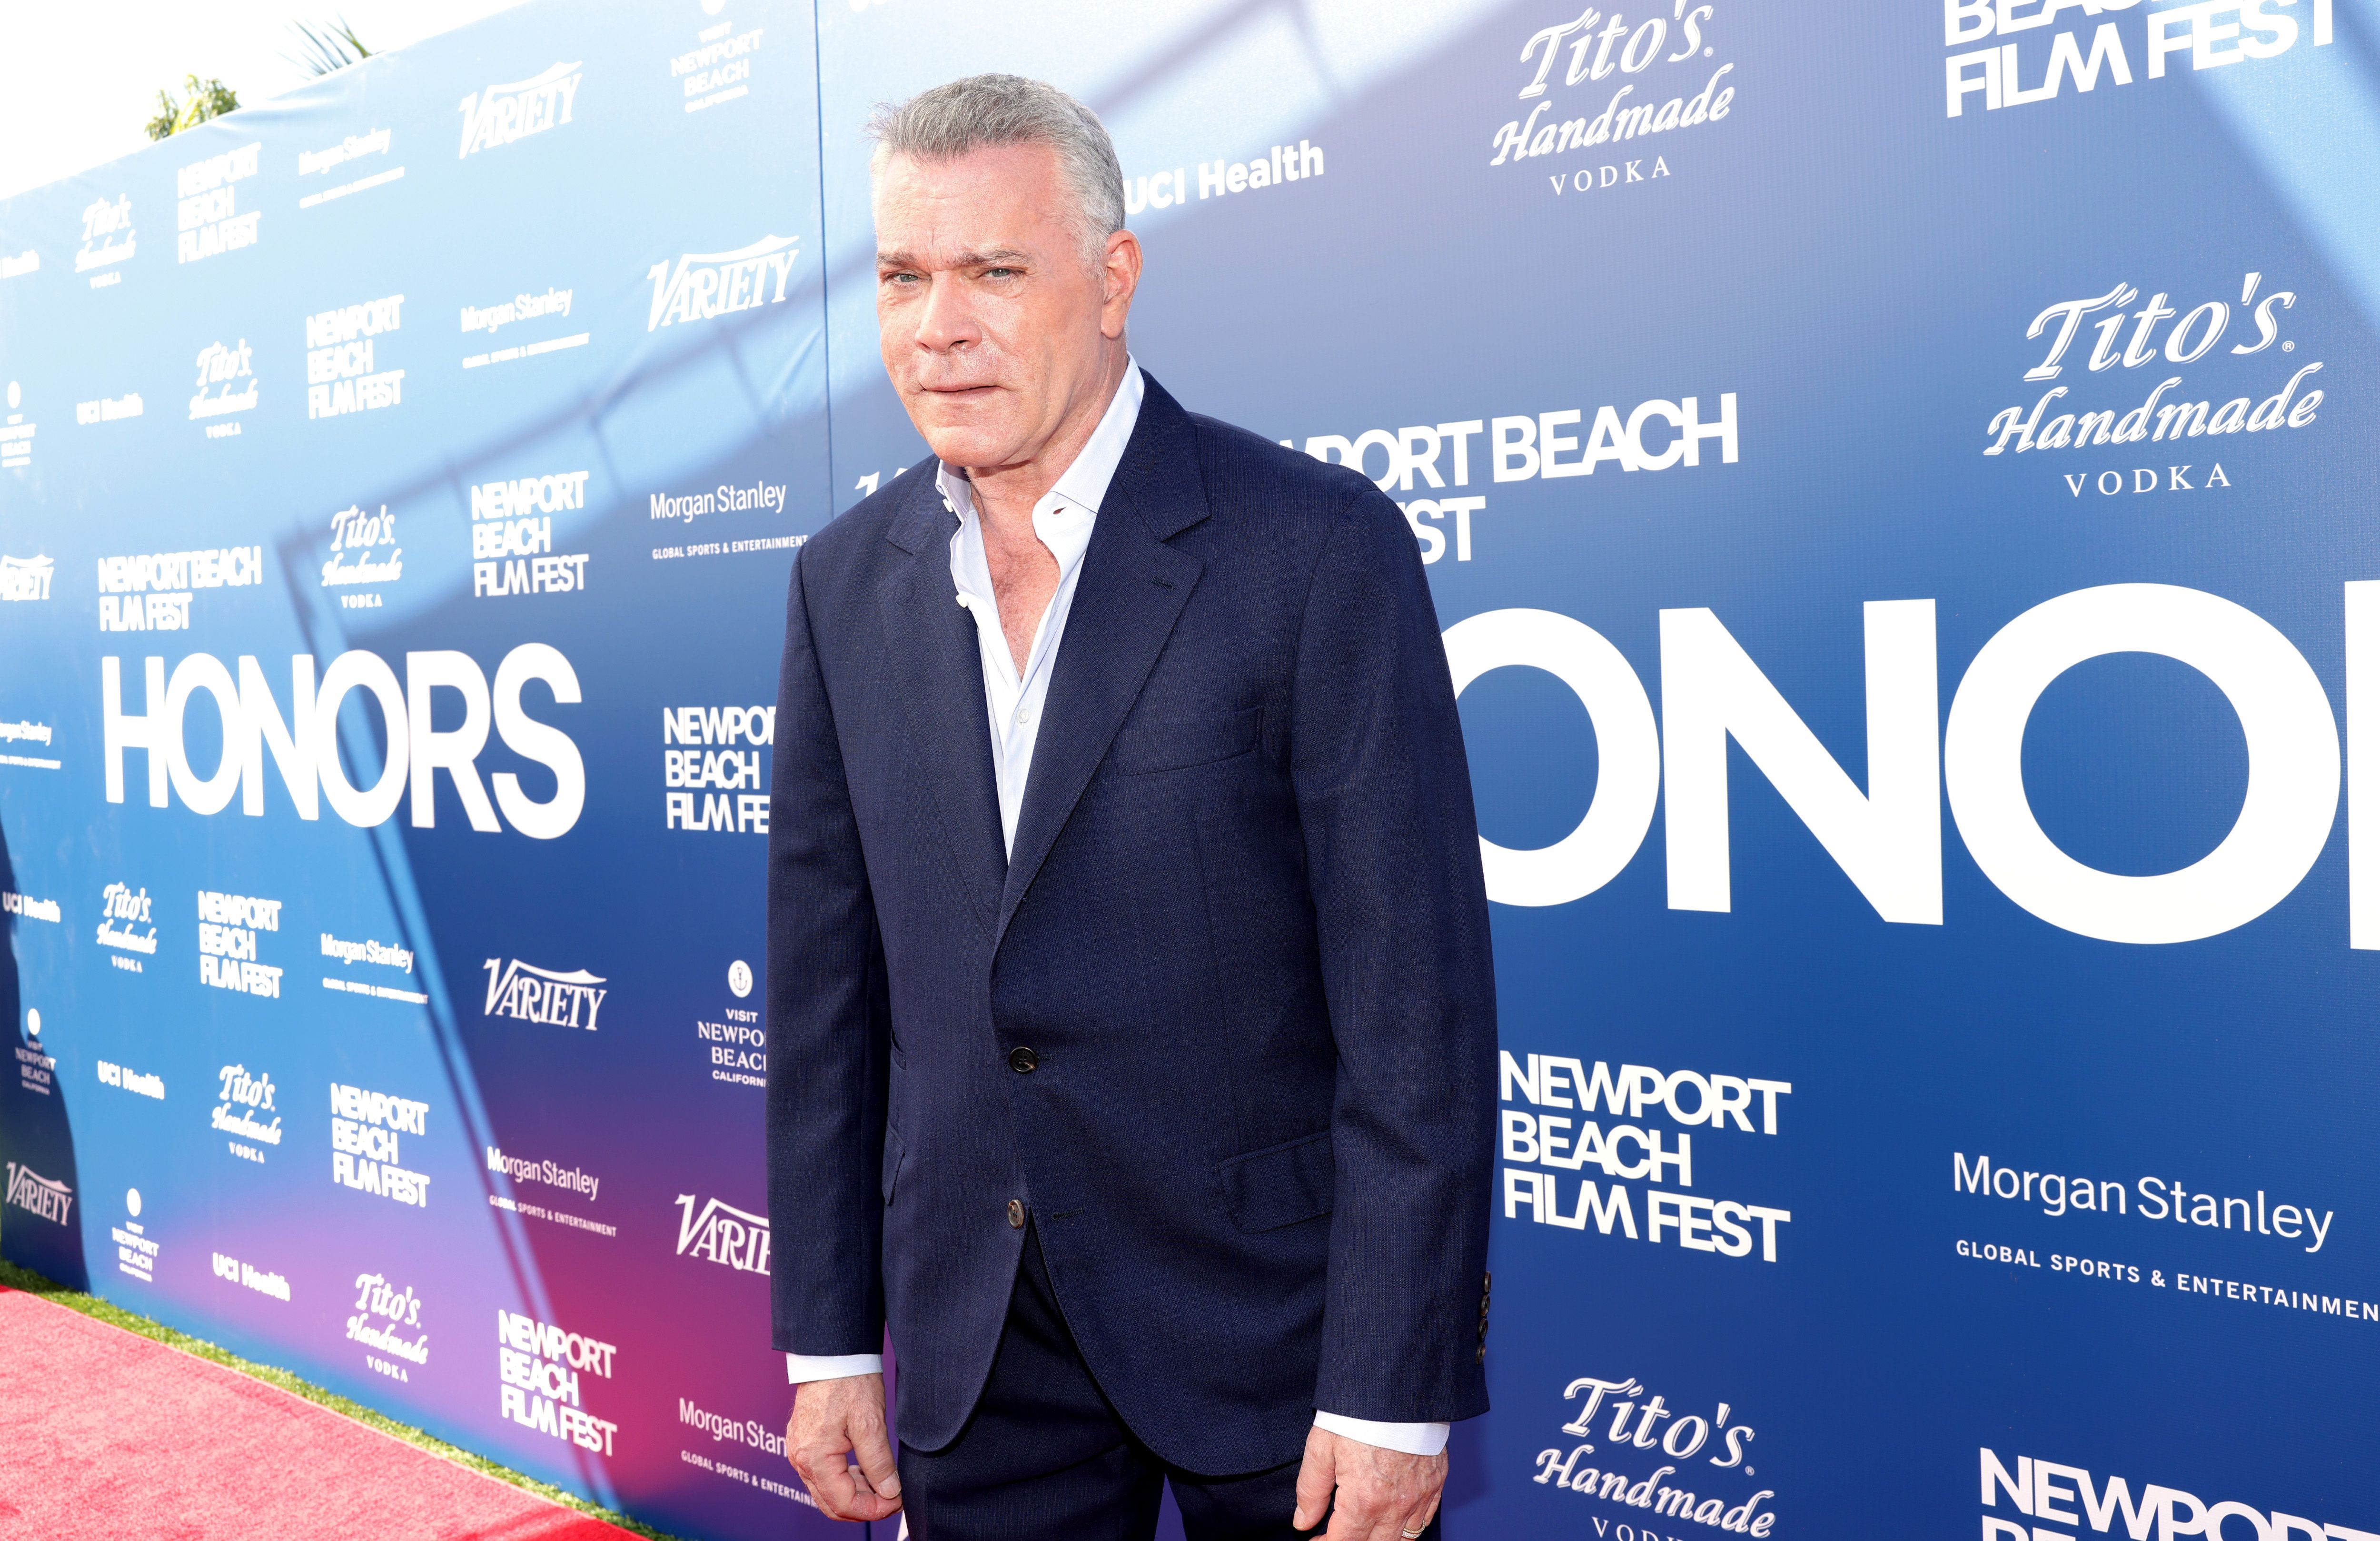 Ray Liotta, who owned a Los Angeles home in the Pacific Palisades, attends a festival in the Newport Beach, California